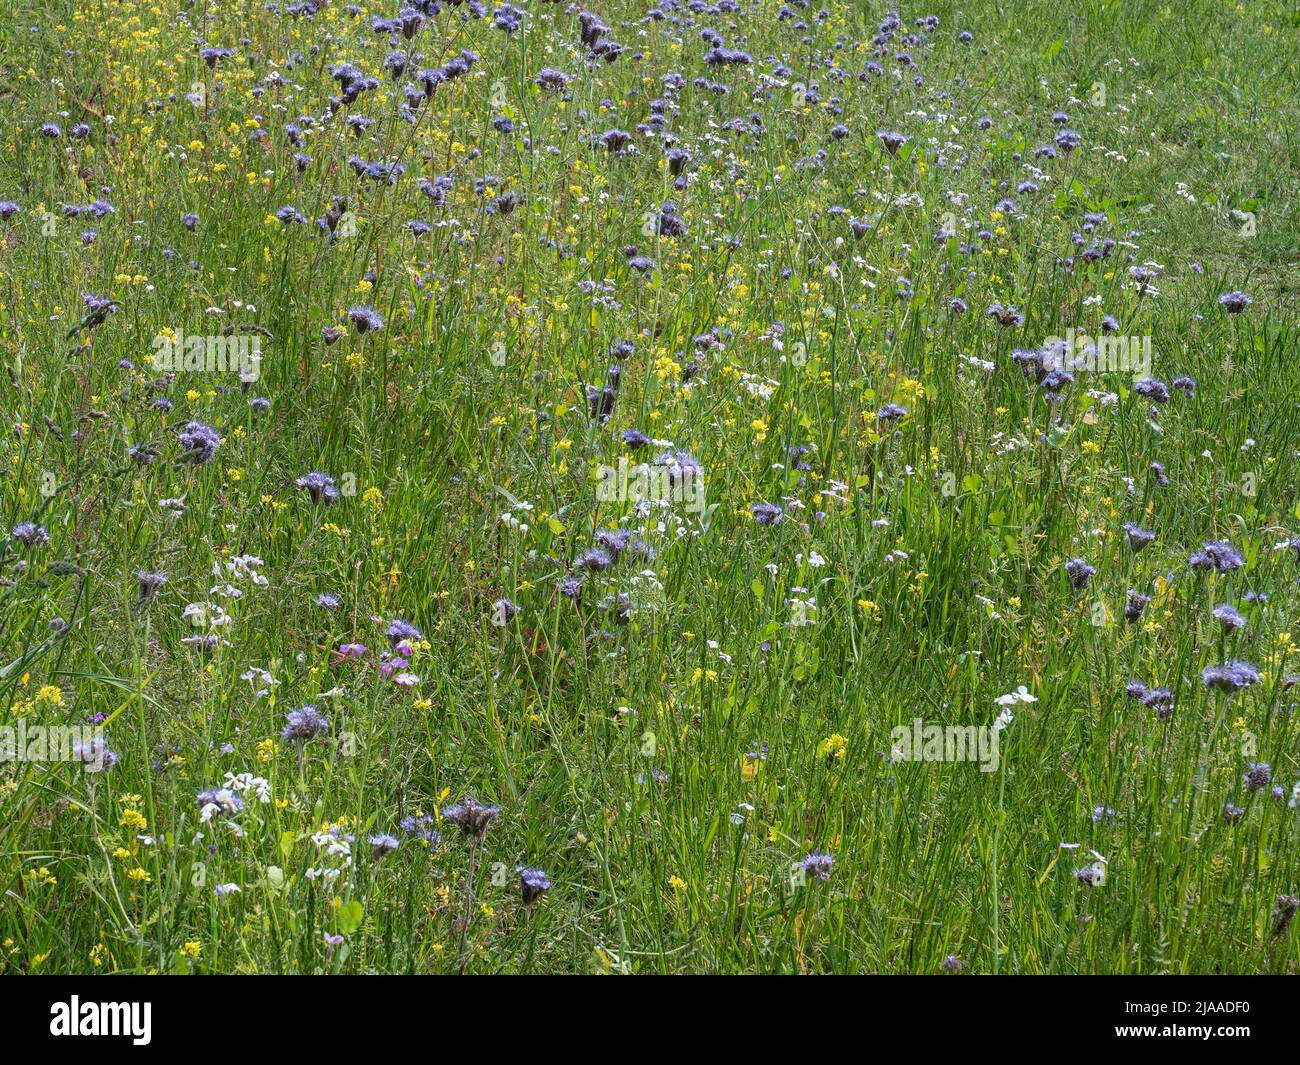 A wildflower meadow with a diverse range of plants in flower and bud Stock Photo